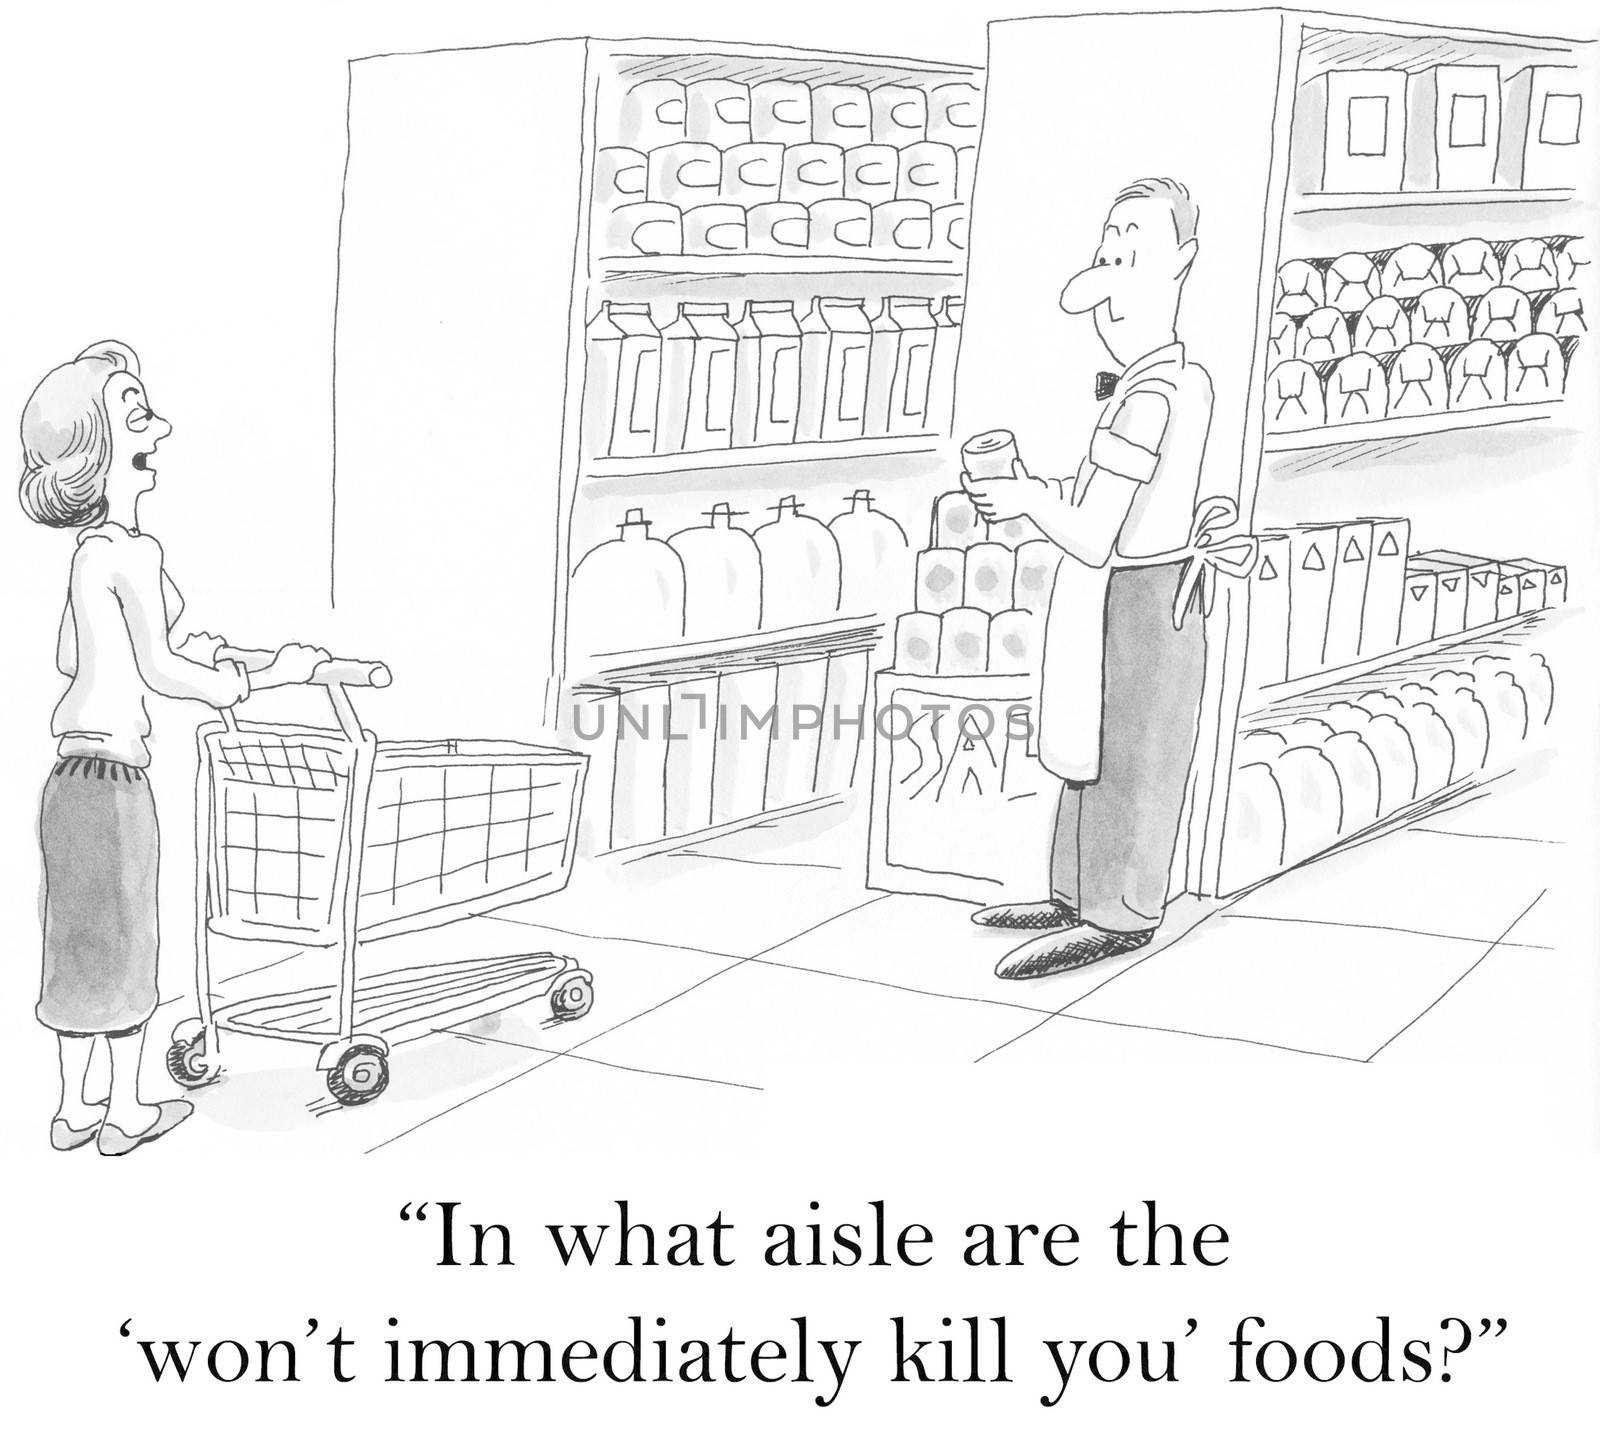 "In what aisle are the 'won't immediately kill you' foods?"